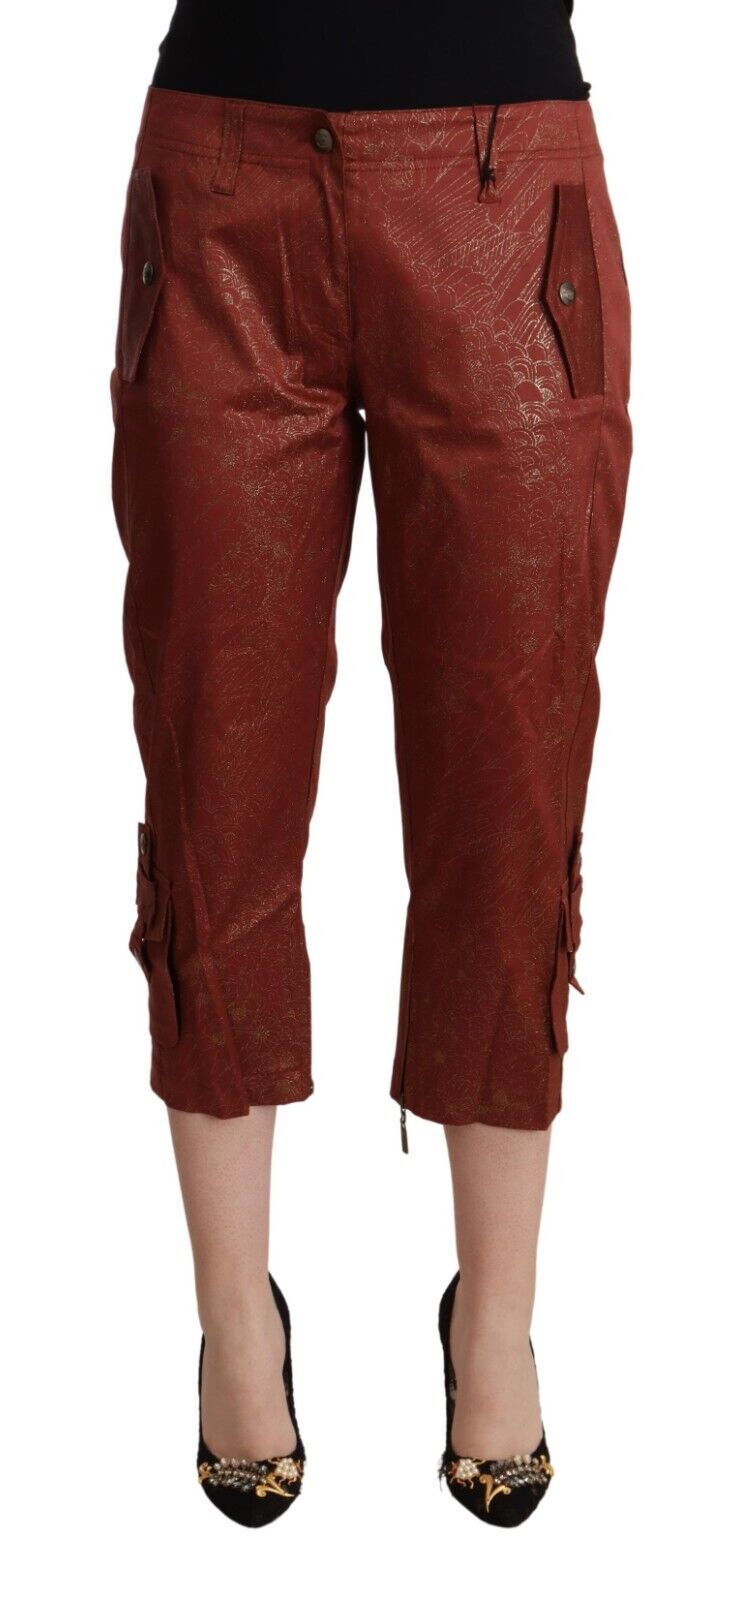 Just Cavalli Chic Brown Cropped Cotton Pants